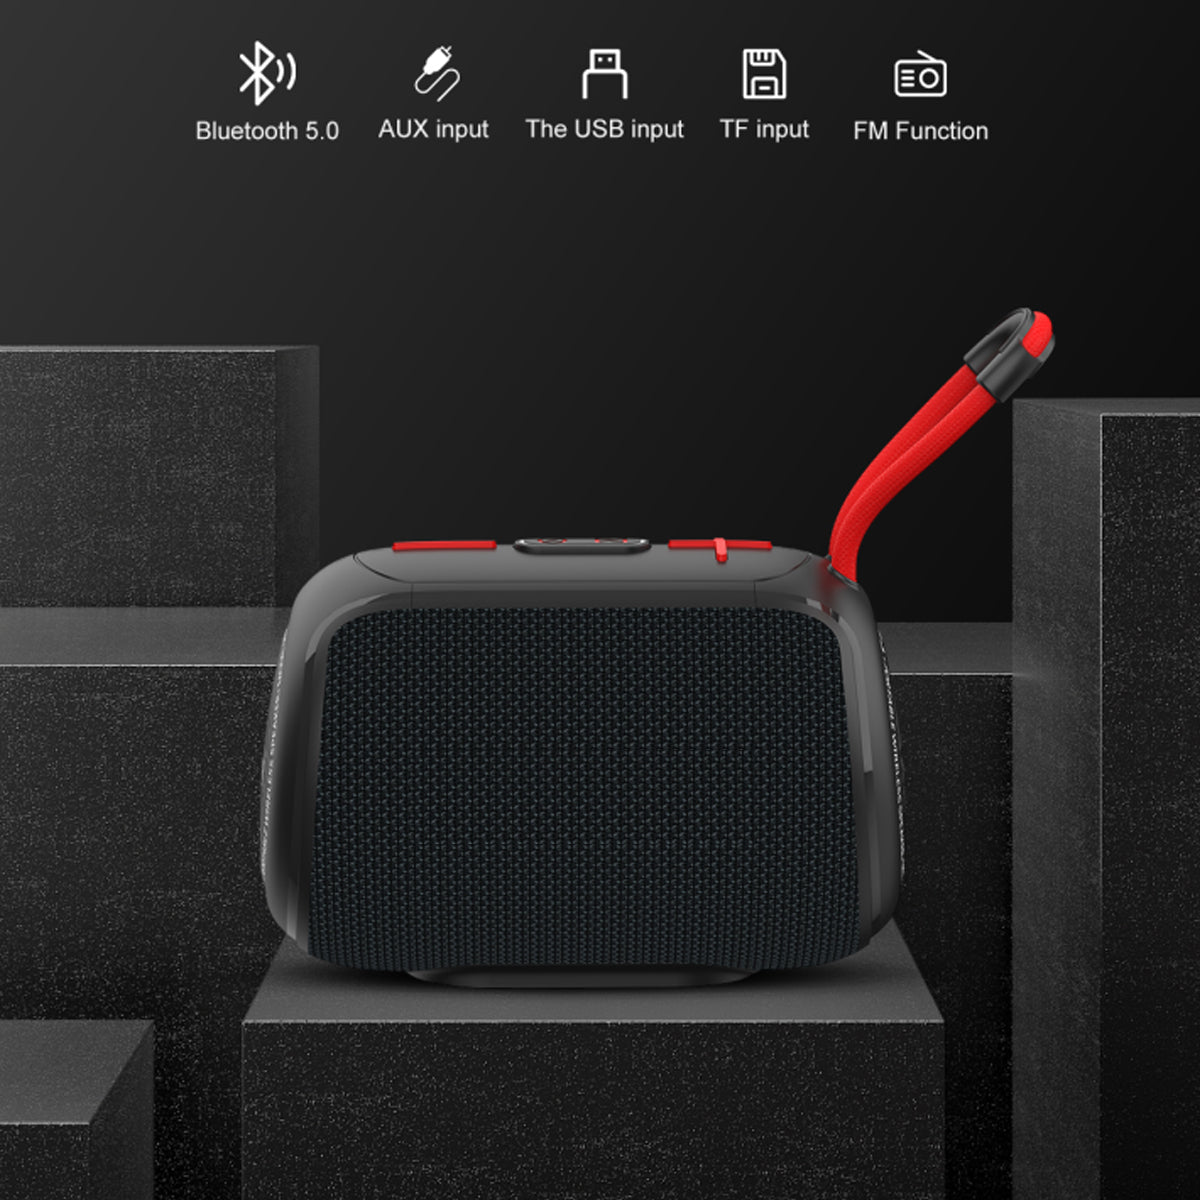 Boomerang Ultra High-Quality Bluetooth Speaker With NFC by VistaShops